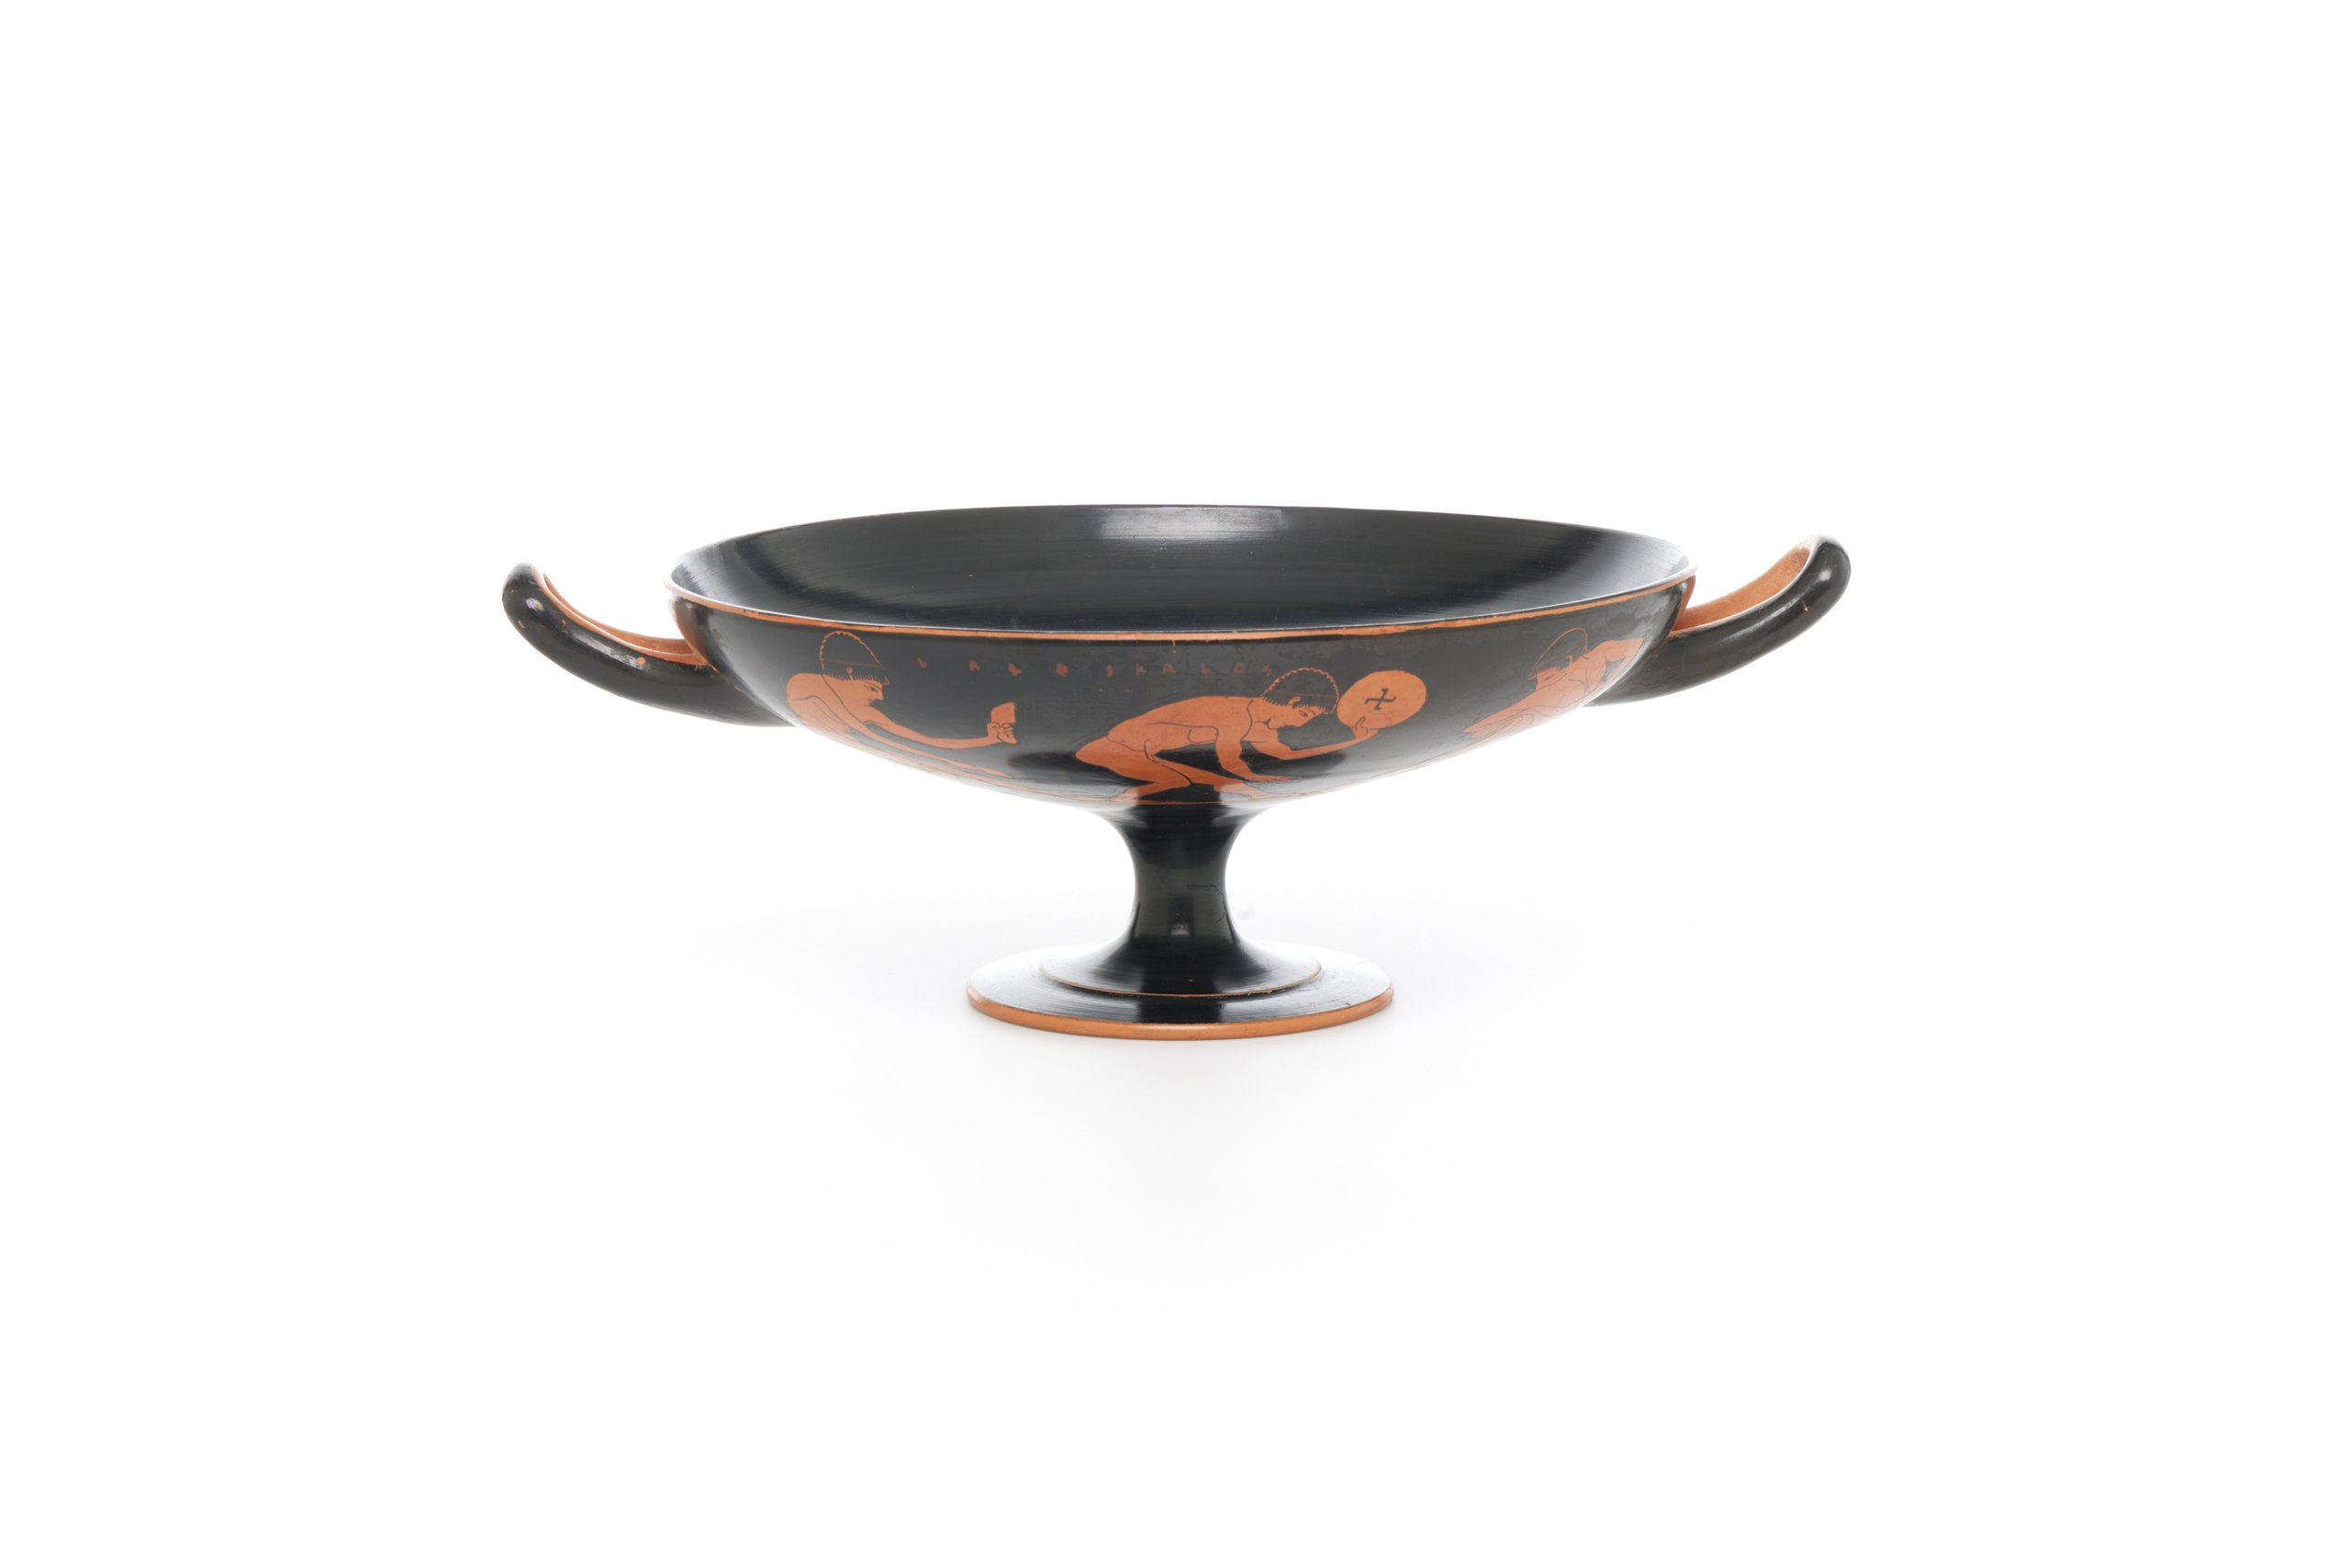 Greek kylix attributed to the Antiphon Painter